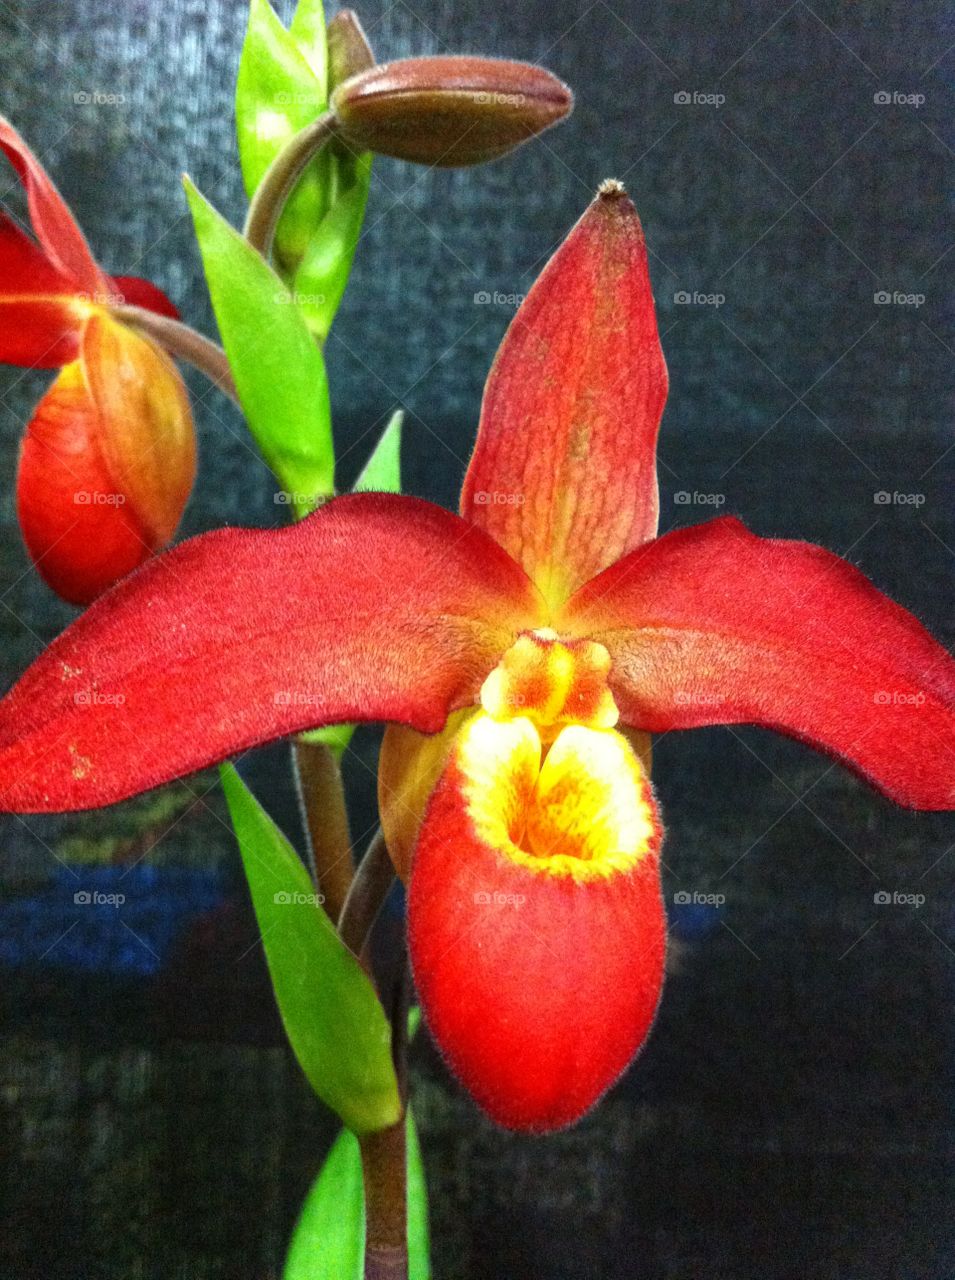 Red Lady Slipper Orchid 